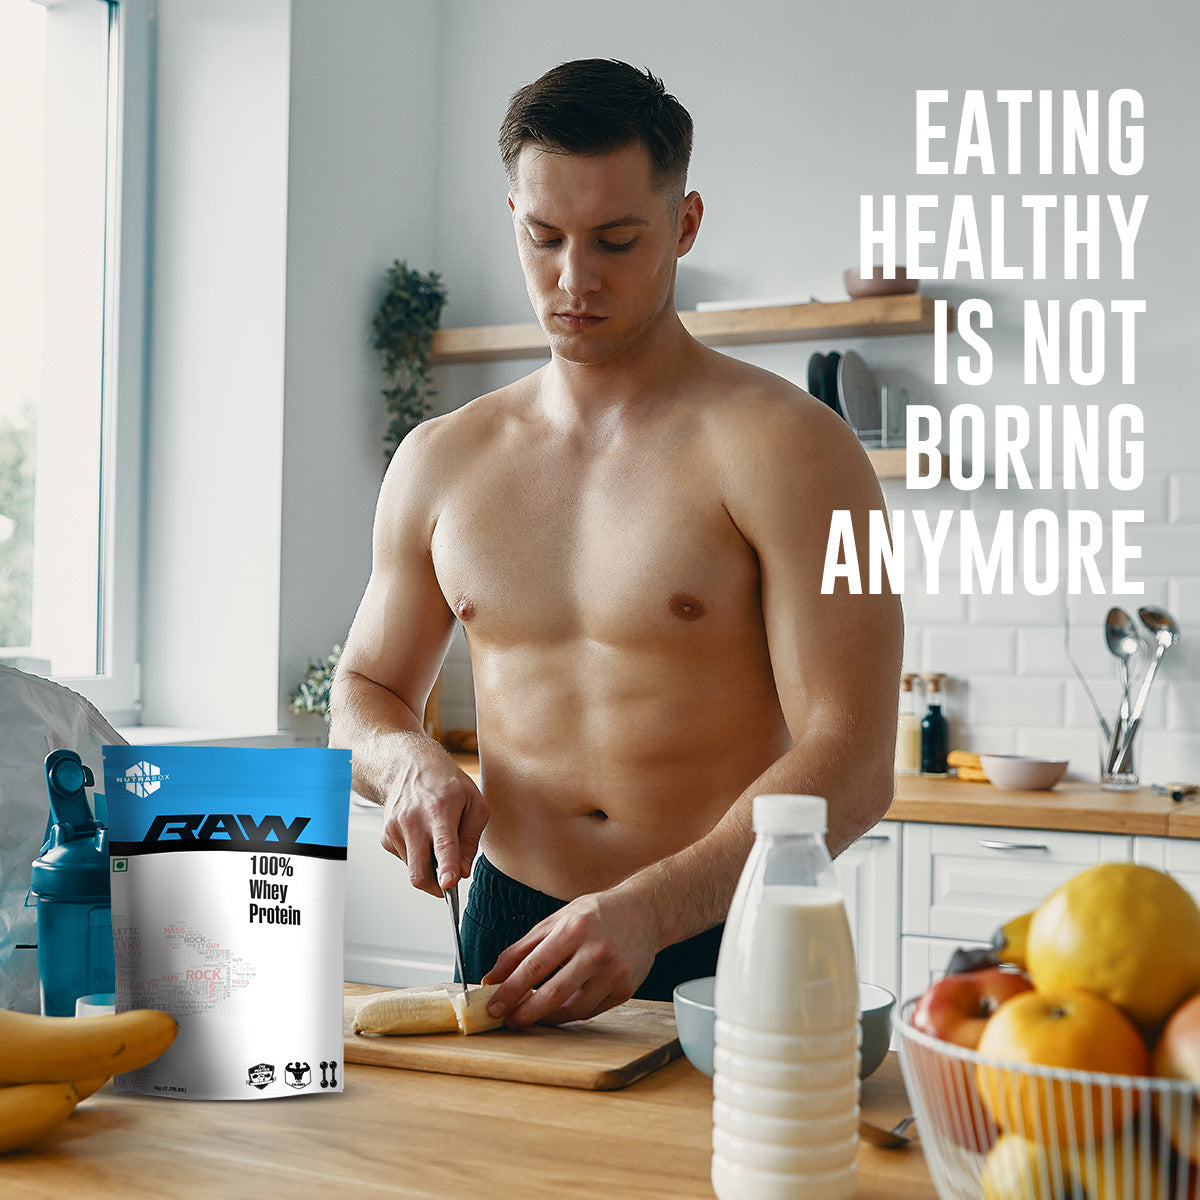 Eating healthy is not boring anymore with Nutrabox Raw Whey Protein